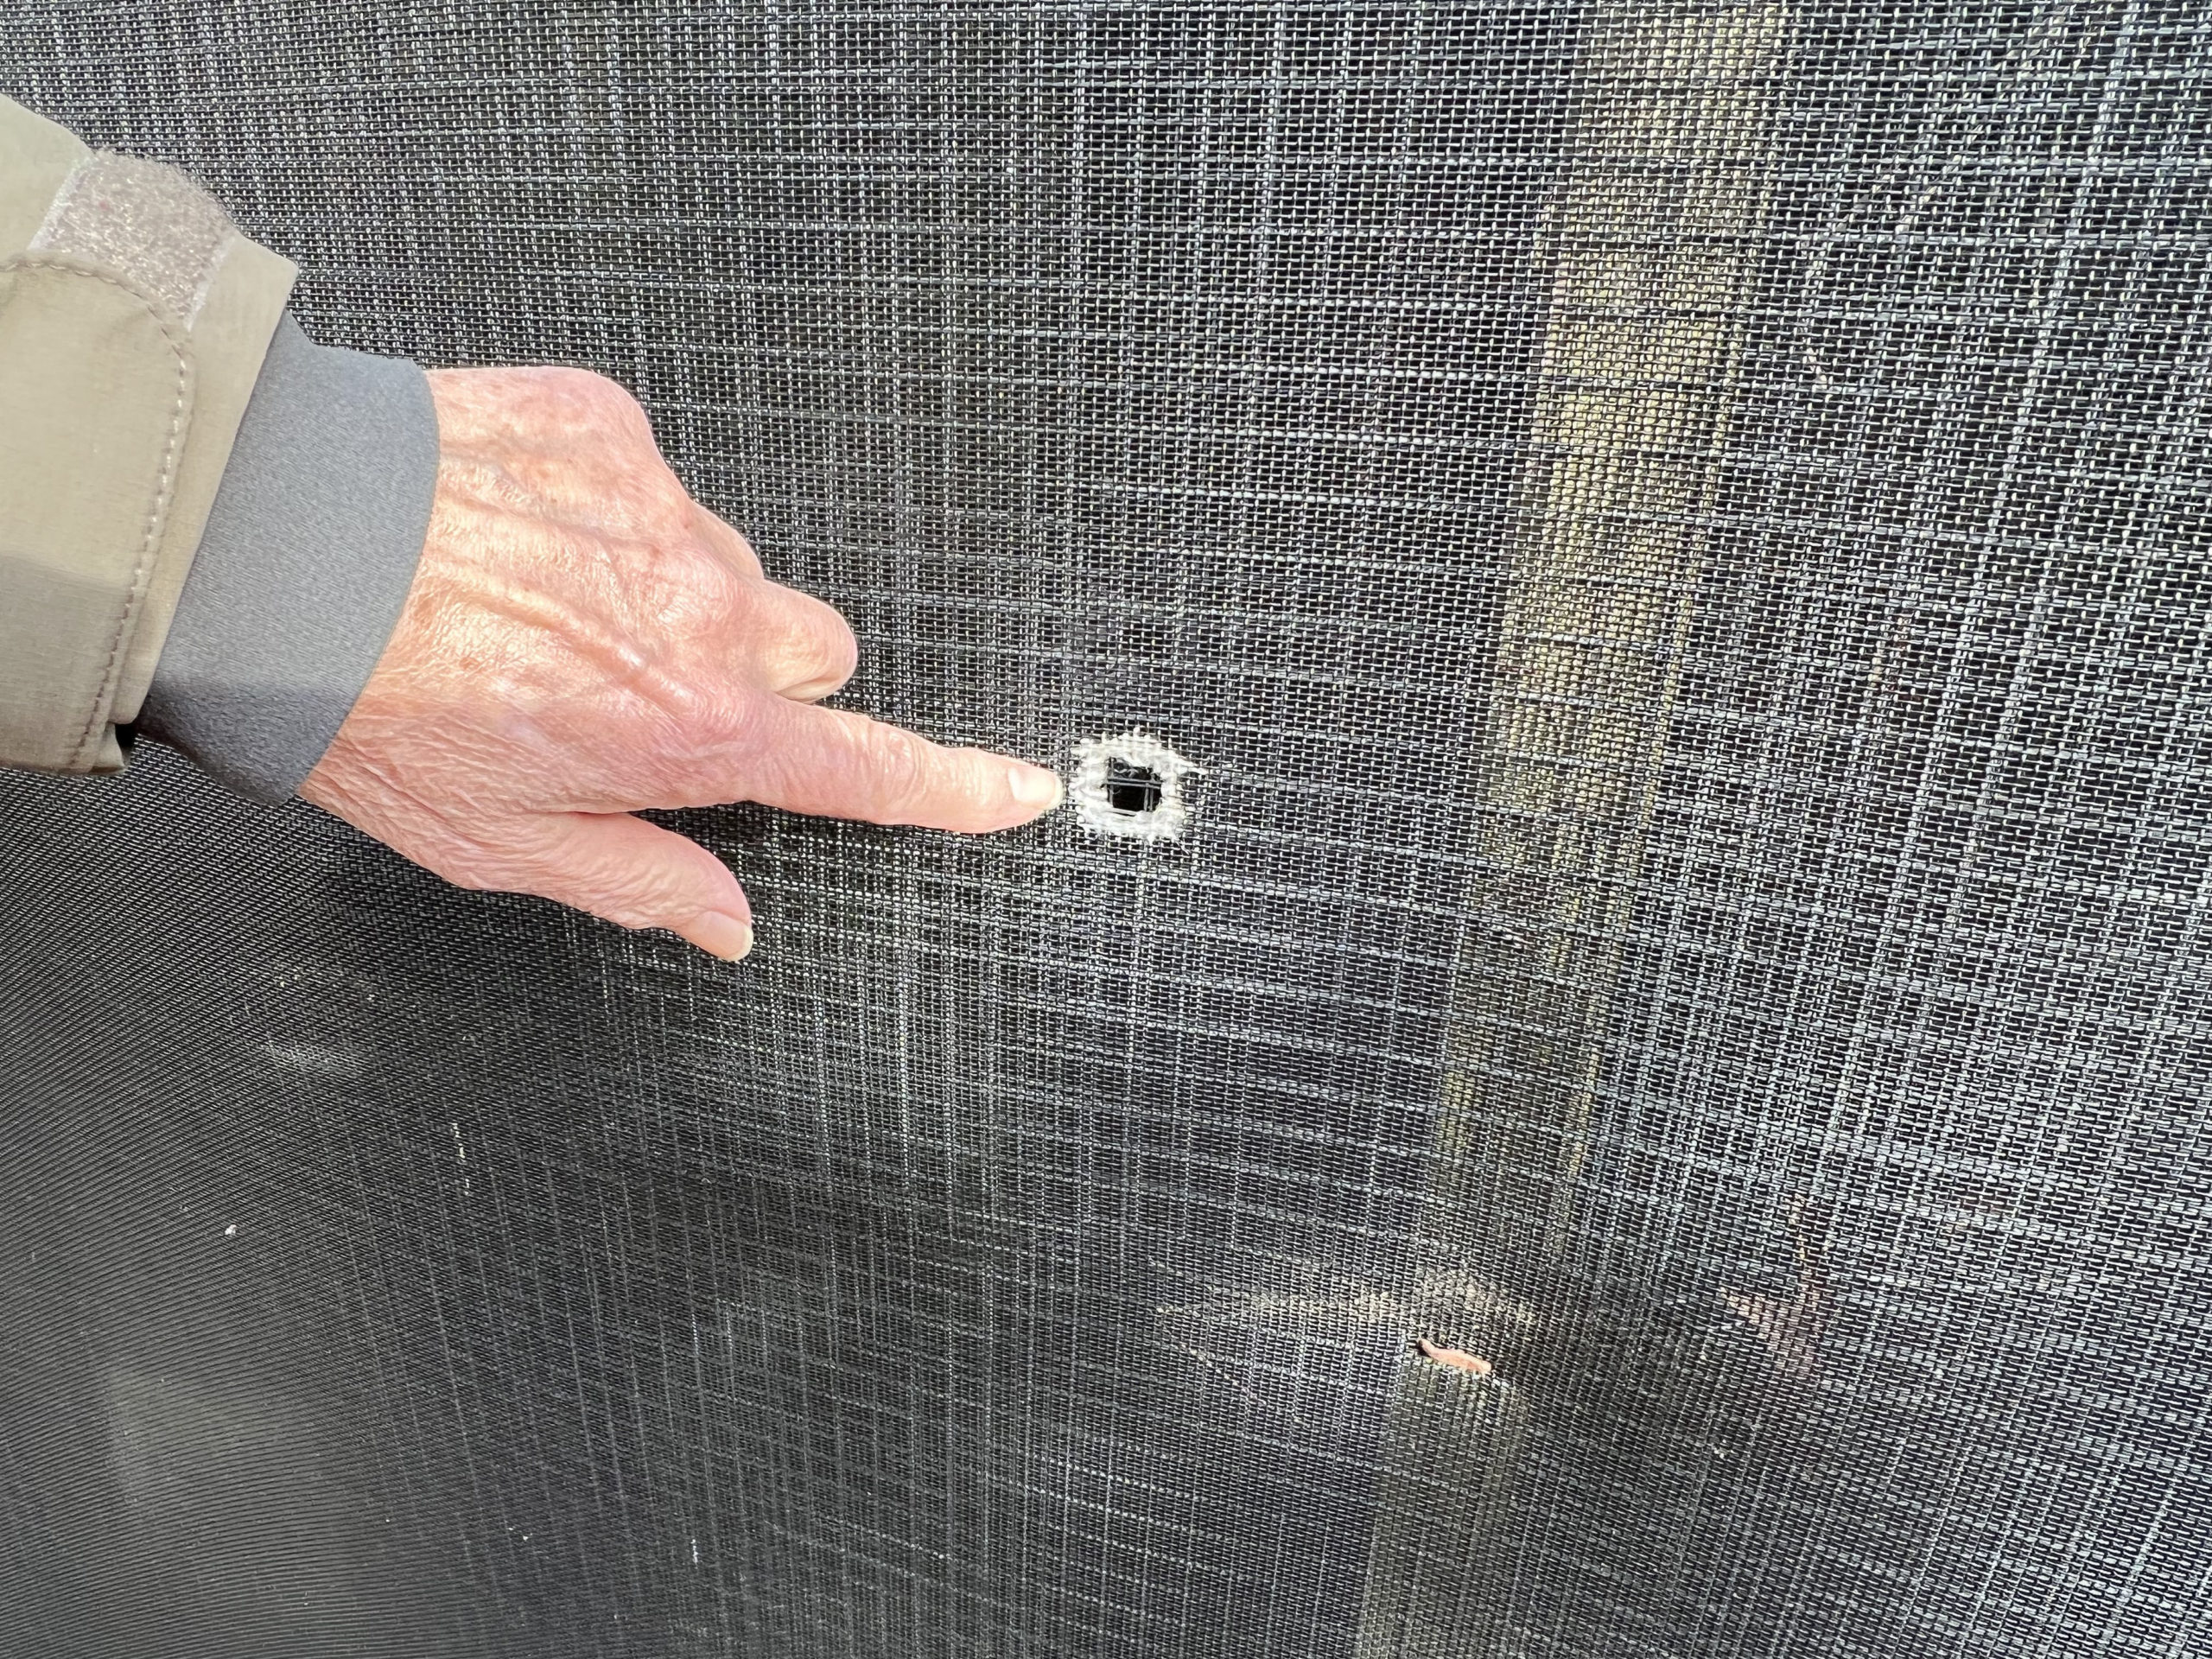 Evelyn Alexander Wildlife Rescue Center Executive Director Ginnie Frati points to the bullet holes that passed through one of the animal enclosures.    DANA SHAW